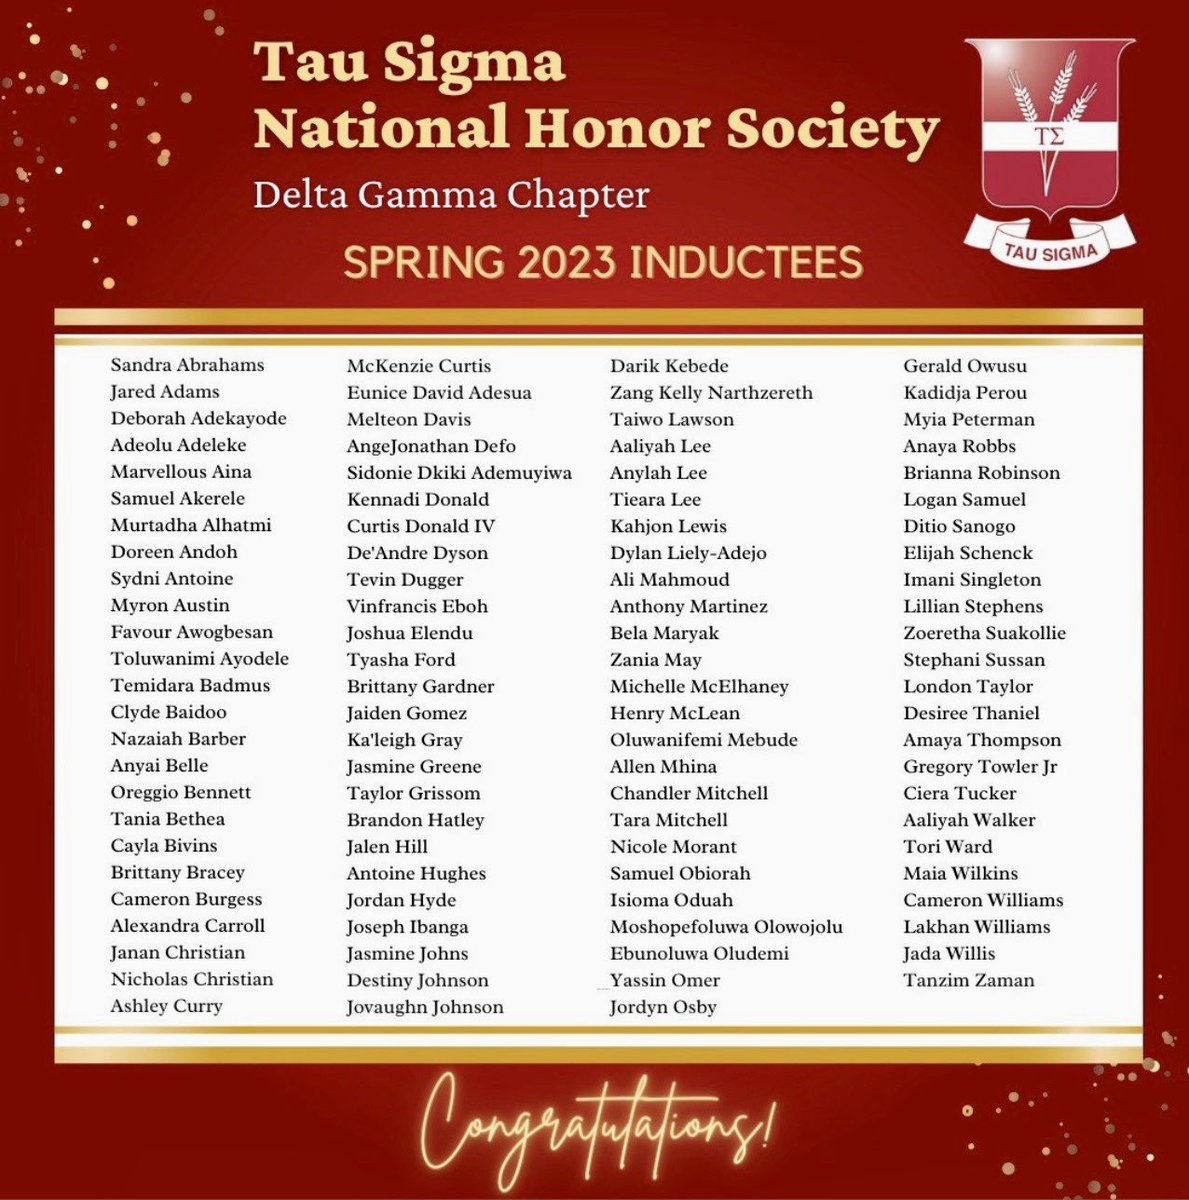 Congratulations to our new transfer students joining our Tau Sigma fam! Introducing our spring 2023 Tau Sigma inductees! 🎉🥳

#TauSigmaNationalHonorSociety #TauSigma #TauSigmaDeltaGamma #TauSigmaBears #MorganStateUniversity
 #GoBears💙🧡 #TransferStudents #TransferStudentSuccess